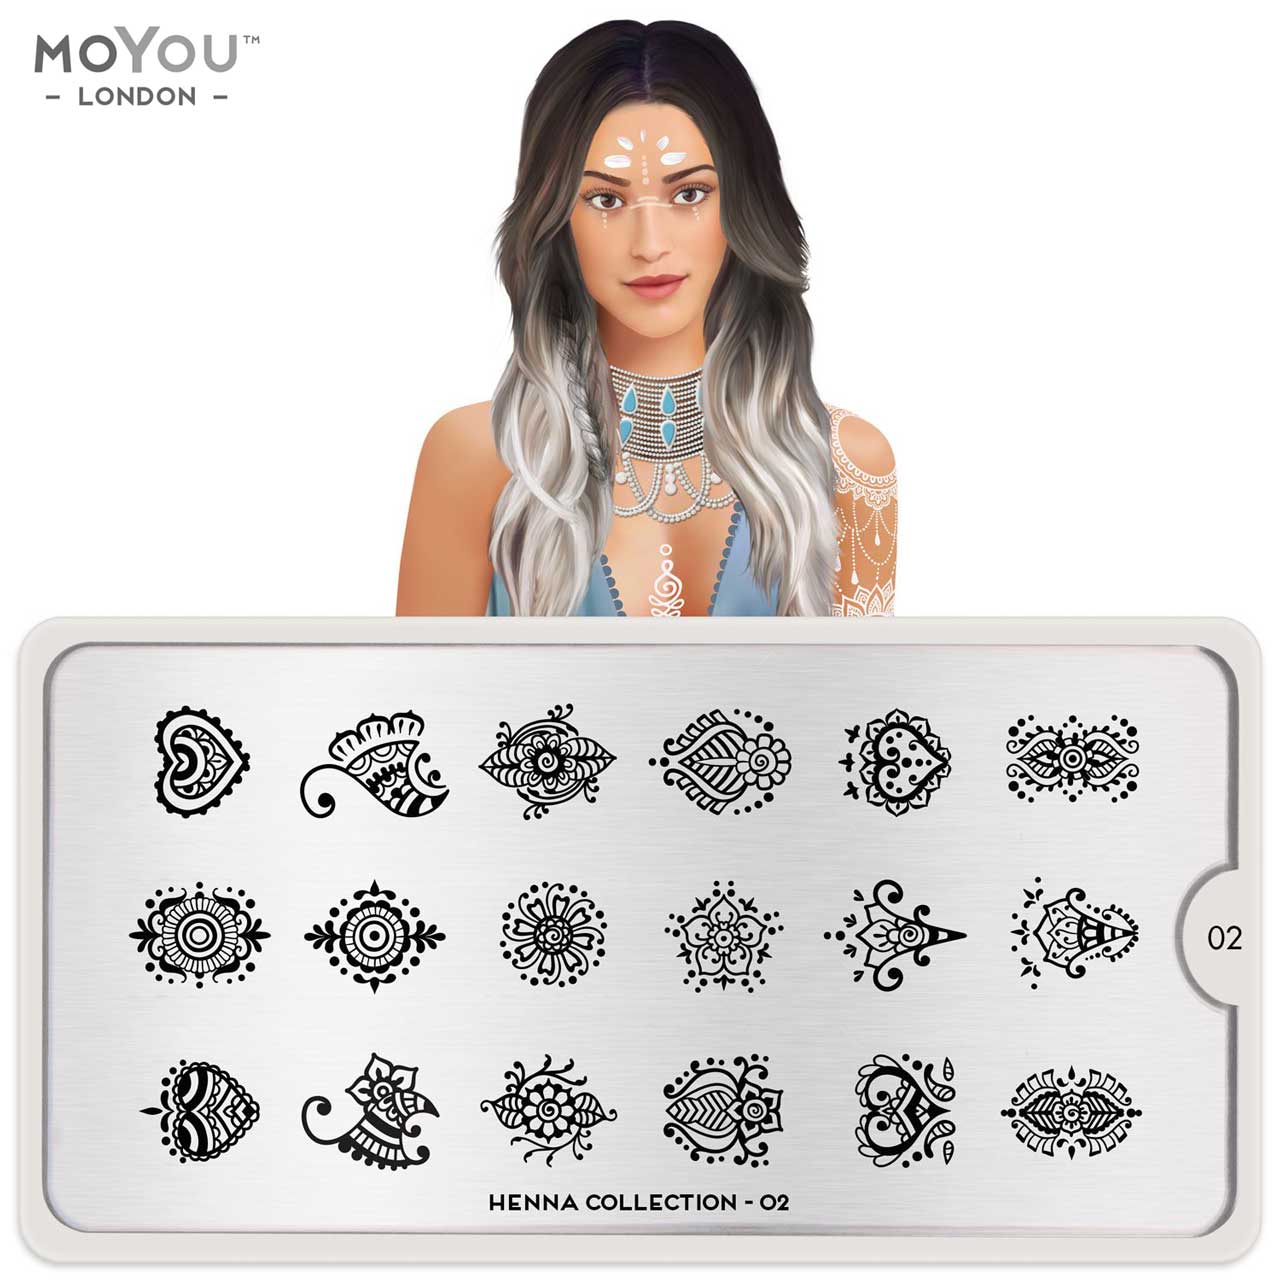 Plaque Stamping Henna 02 - MoYou London